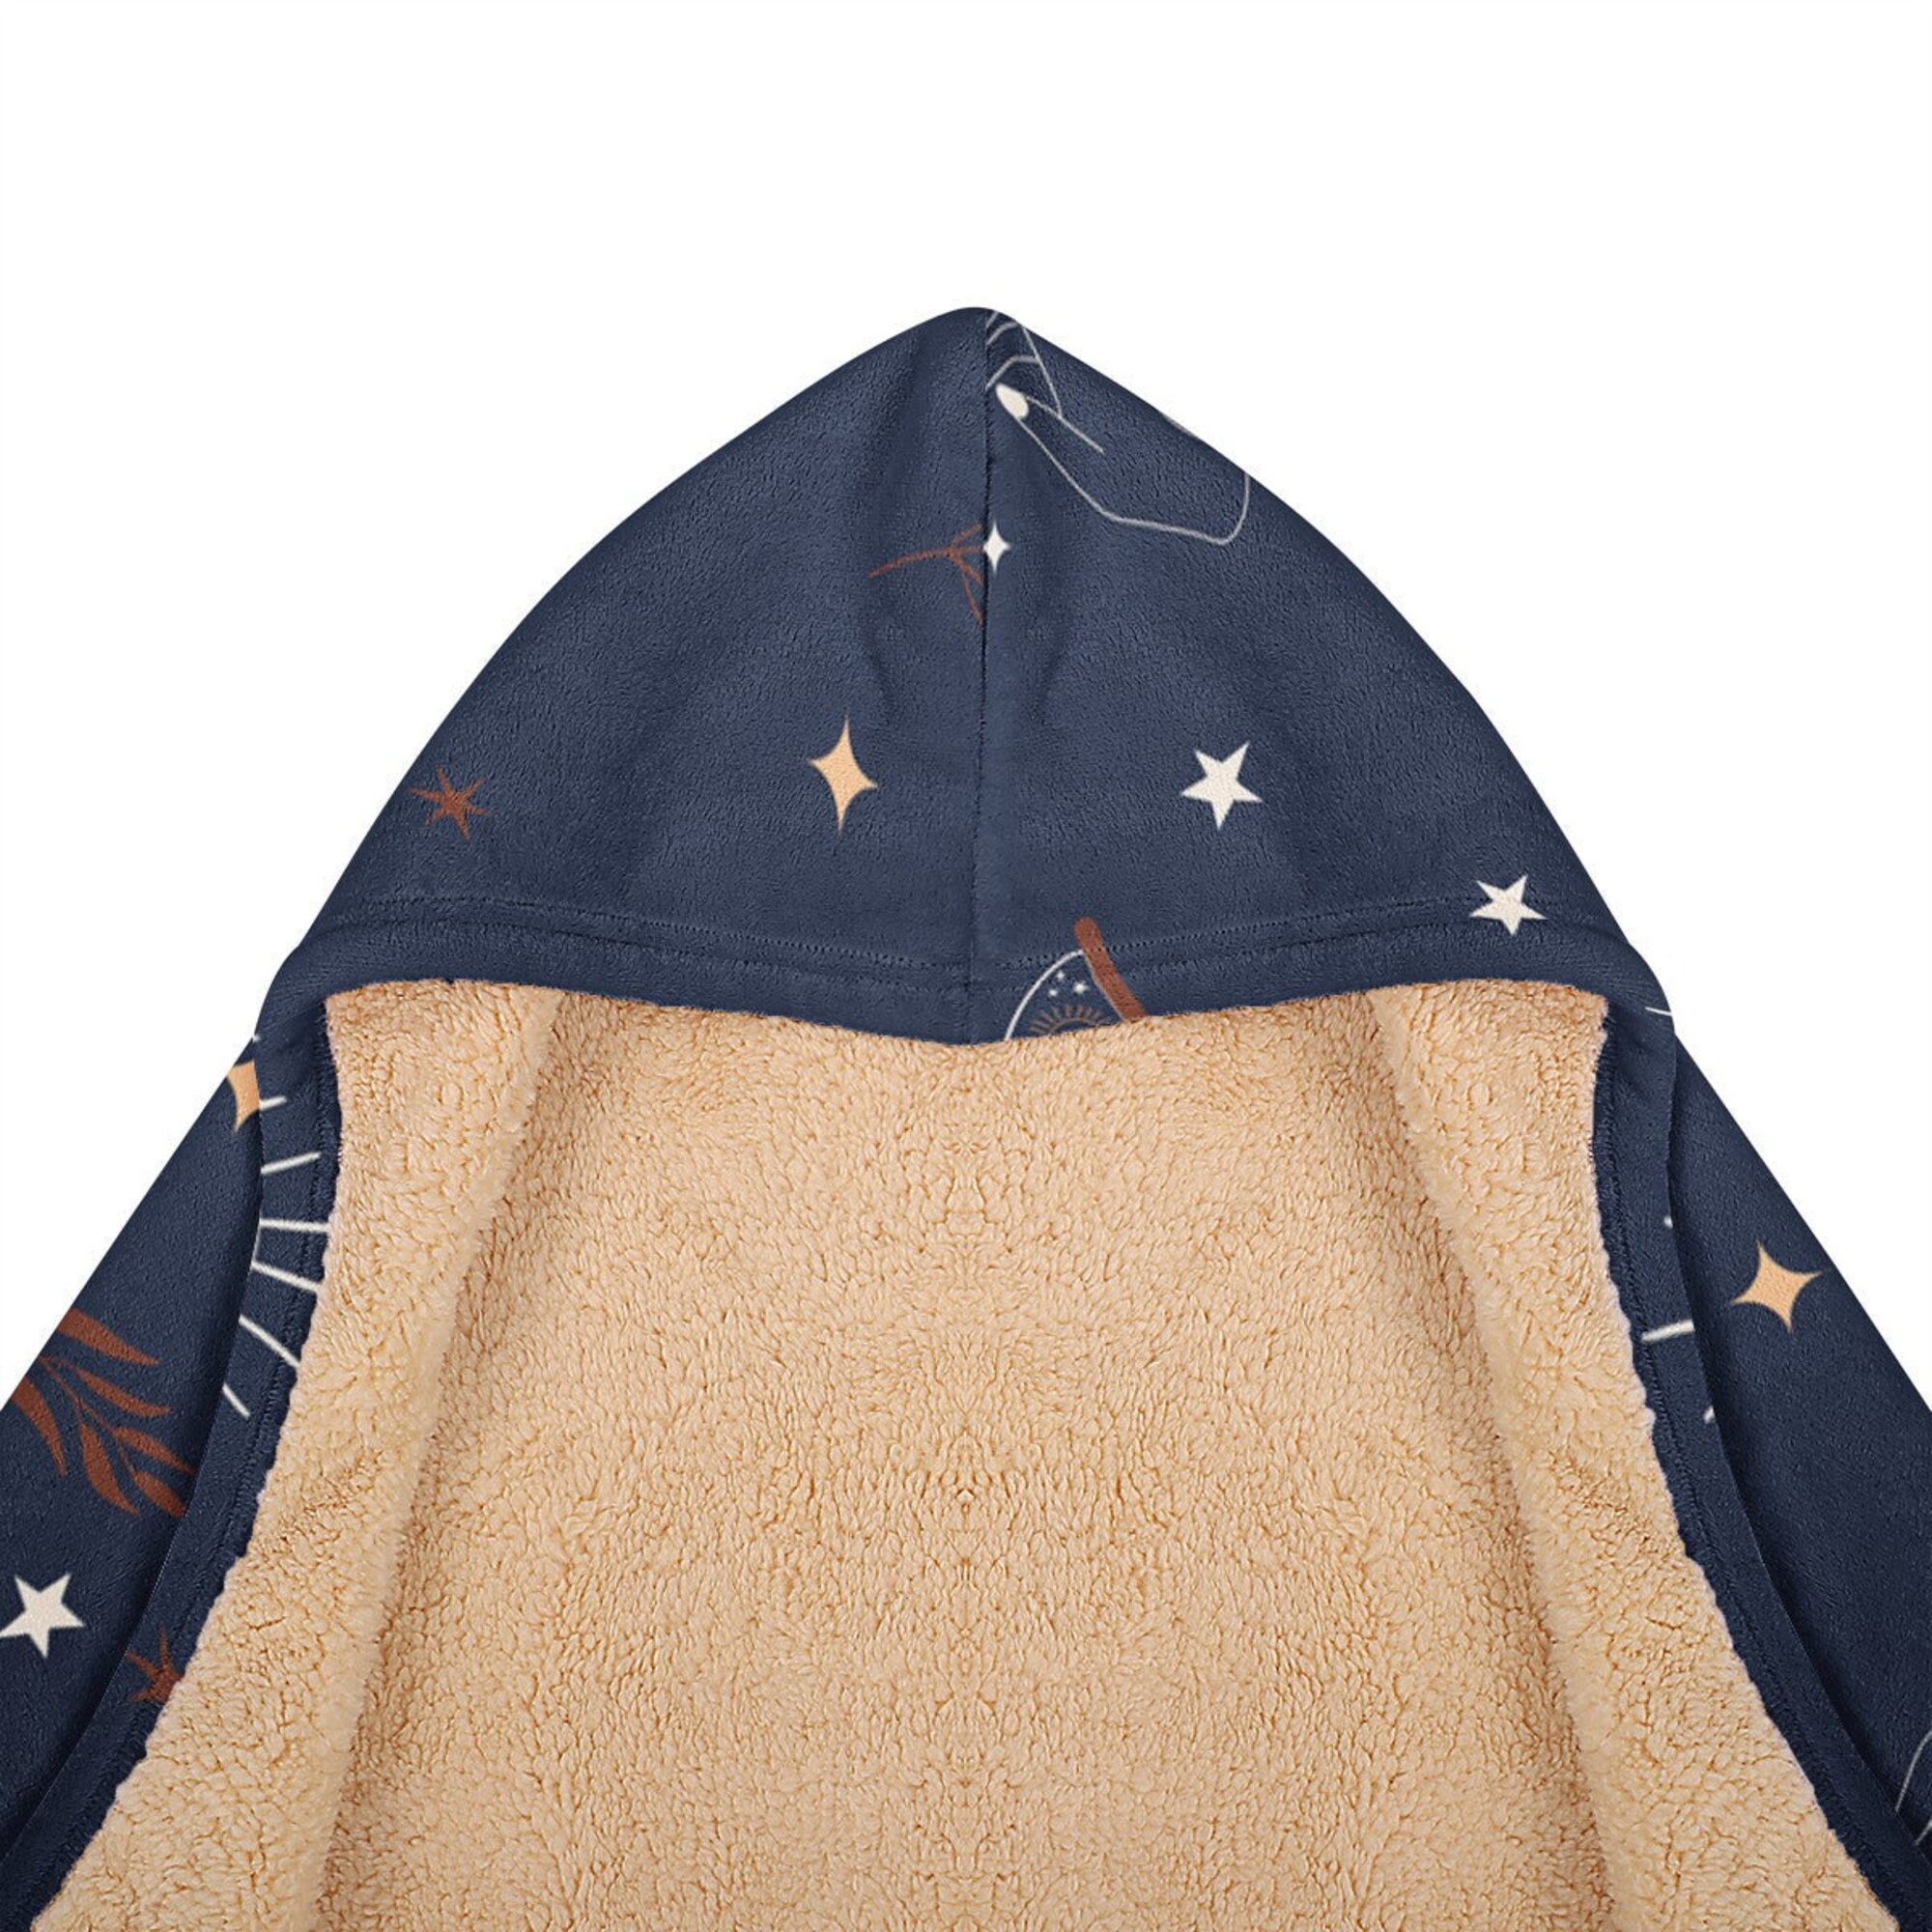 Esoteric Moon Phases Alchemy Stars Hooded Blanket - Crescent Moon, Artistic Trendy Chic Fashion, Tarot Blanket, Warm Wearable Hoodie